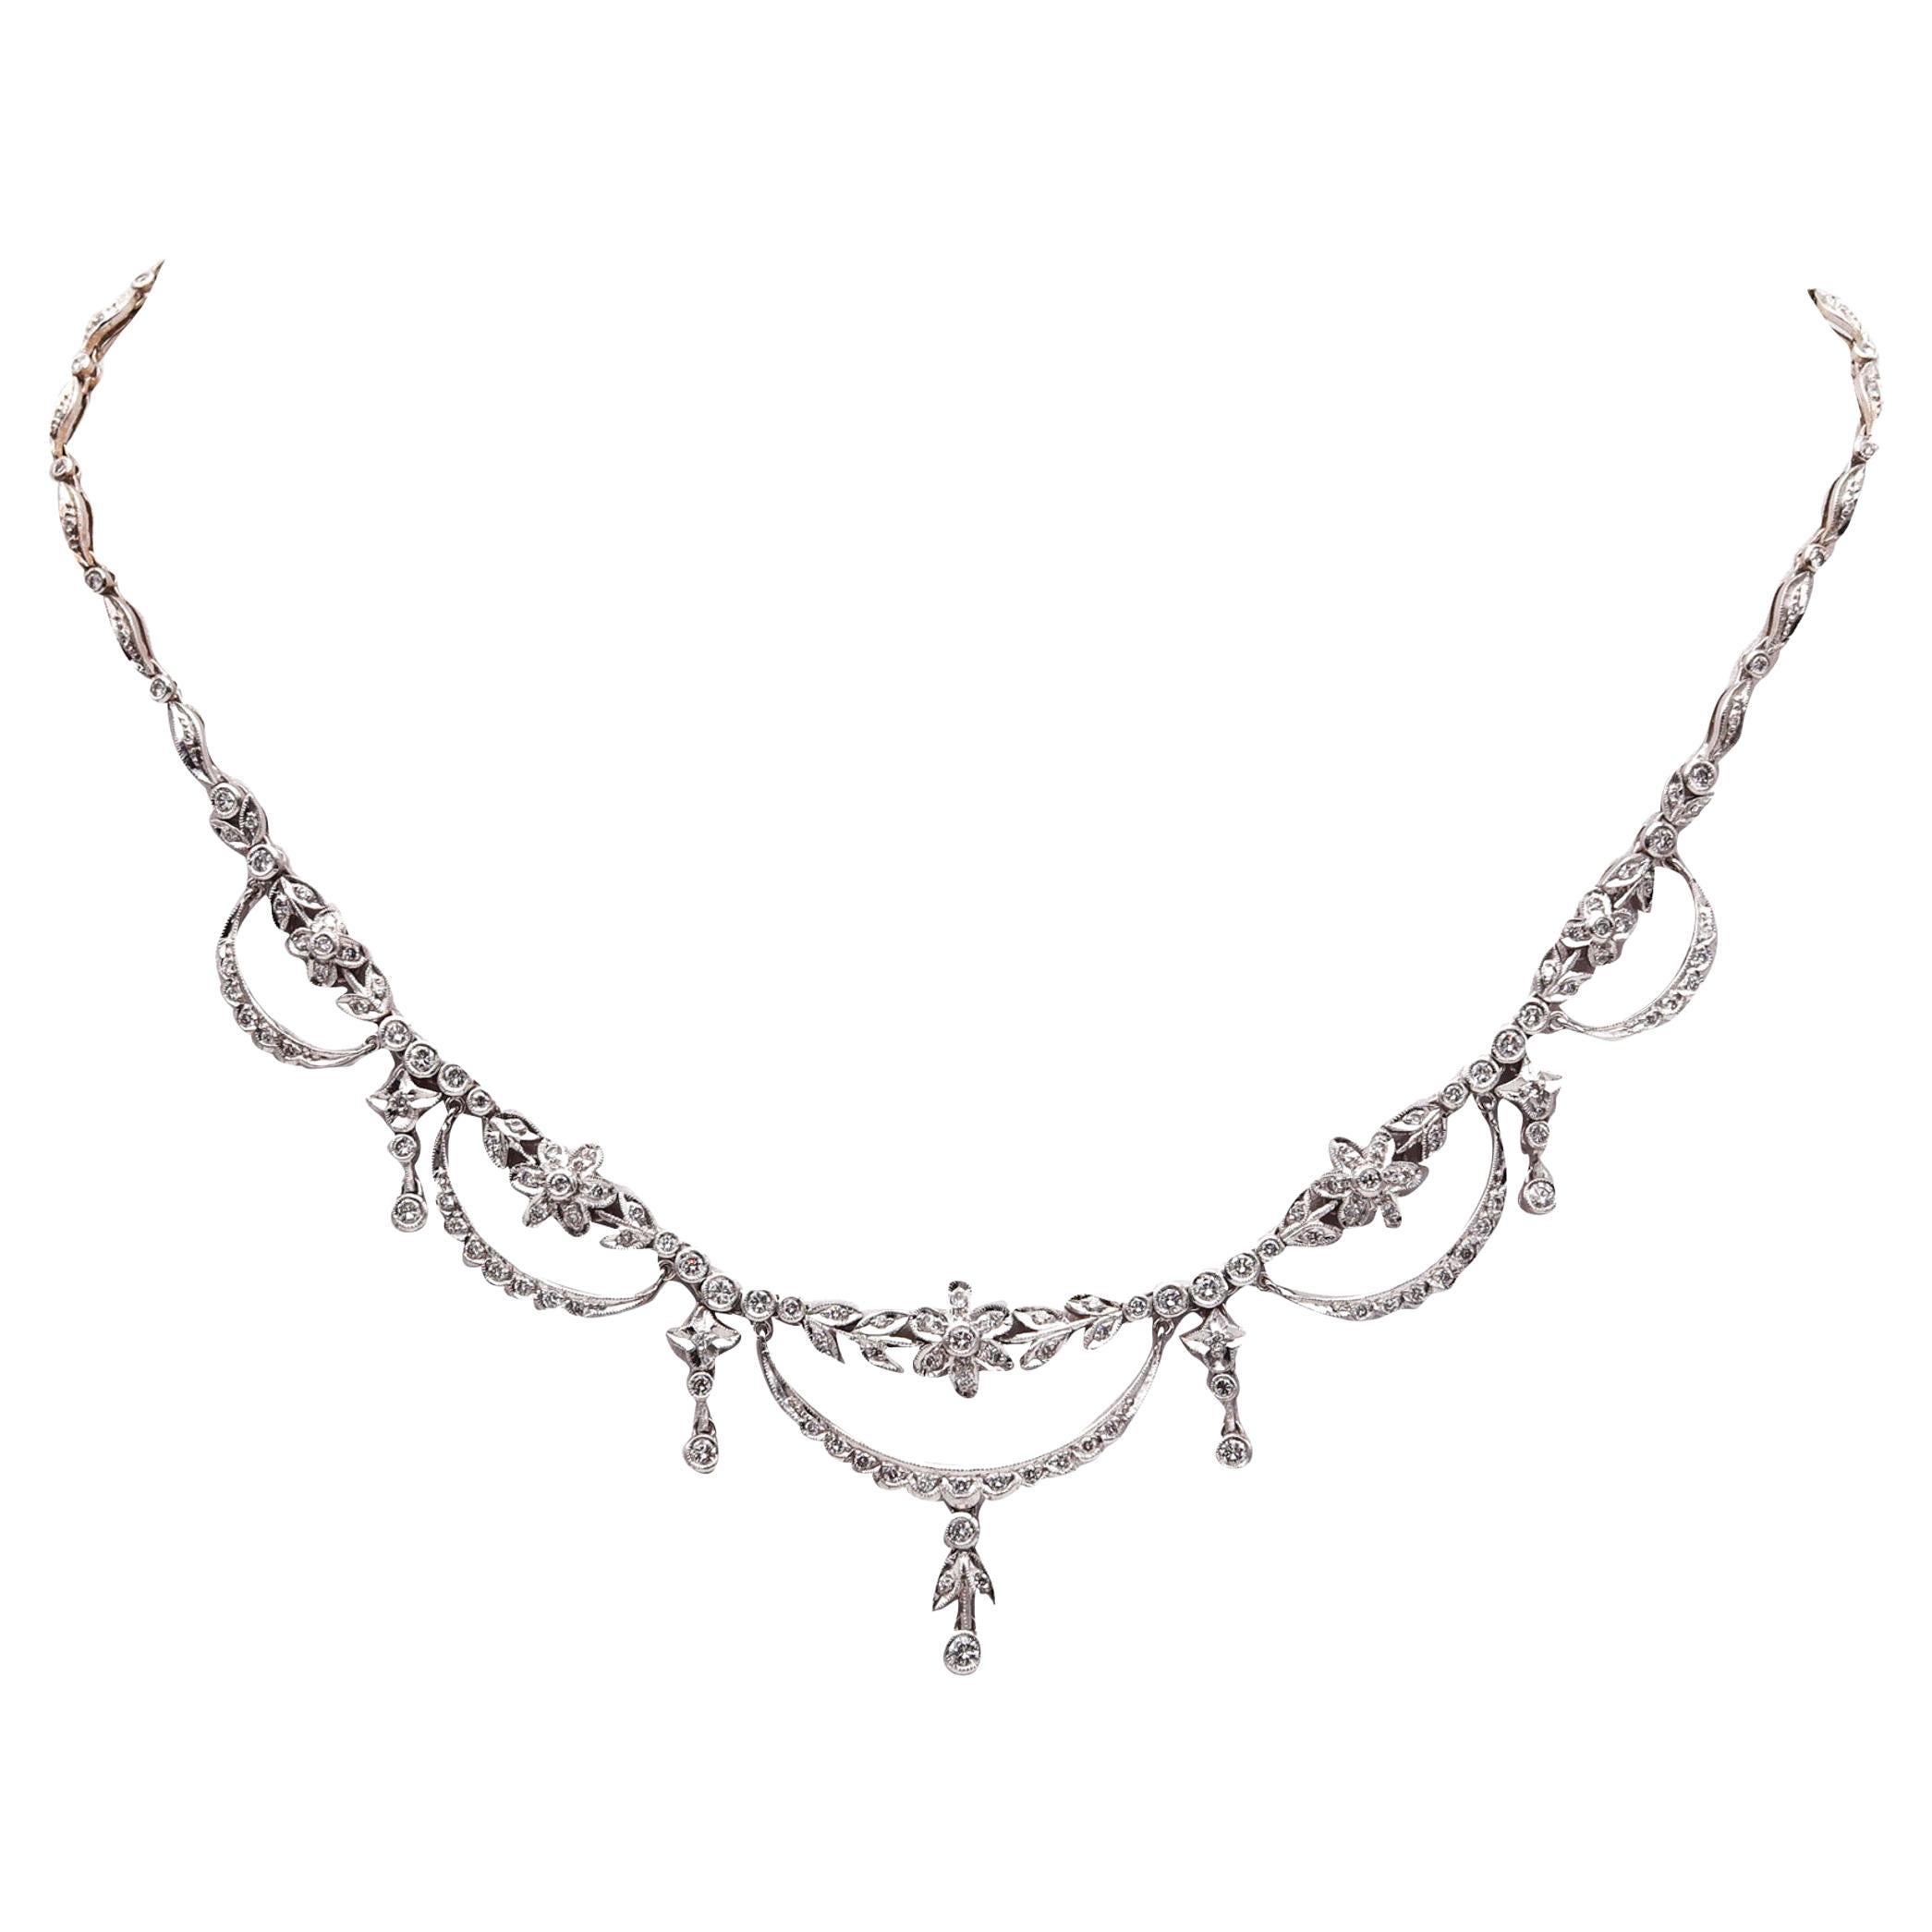 Edwardian 1910 Garlands Necklace In 18Kt White Gold With 3.72 Ctw In Diamonds